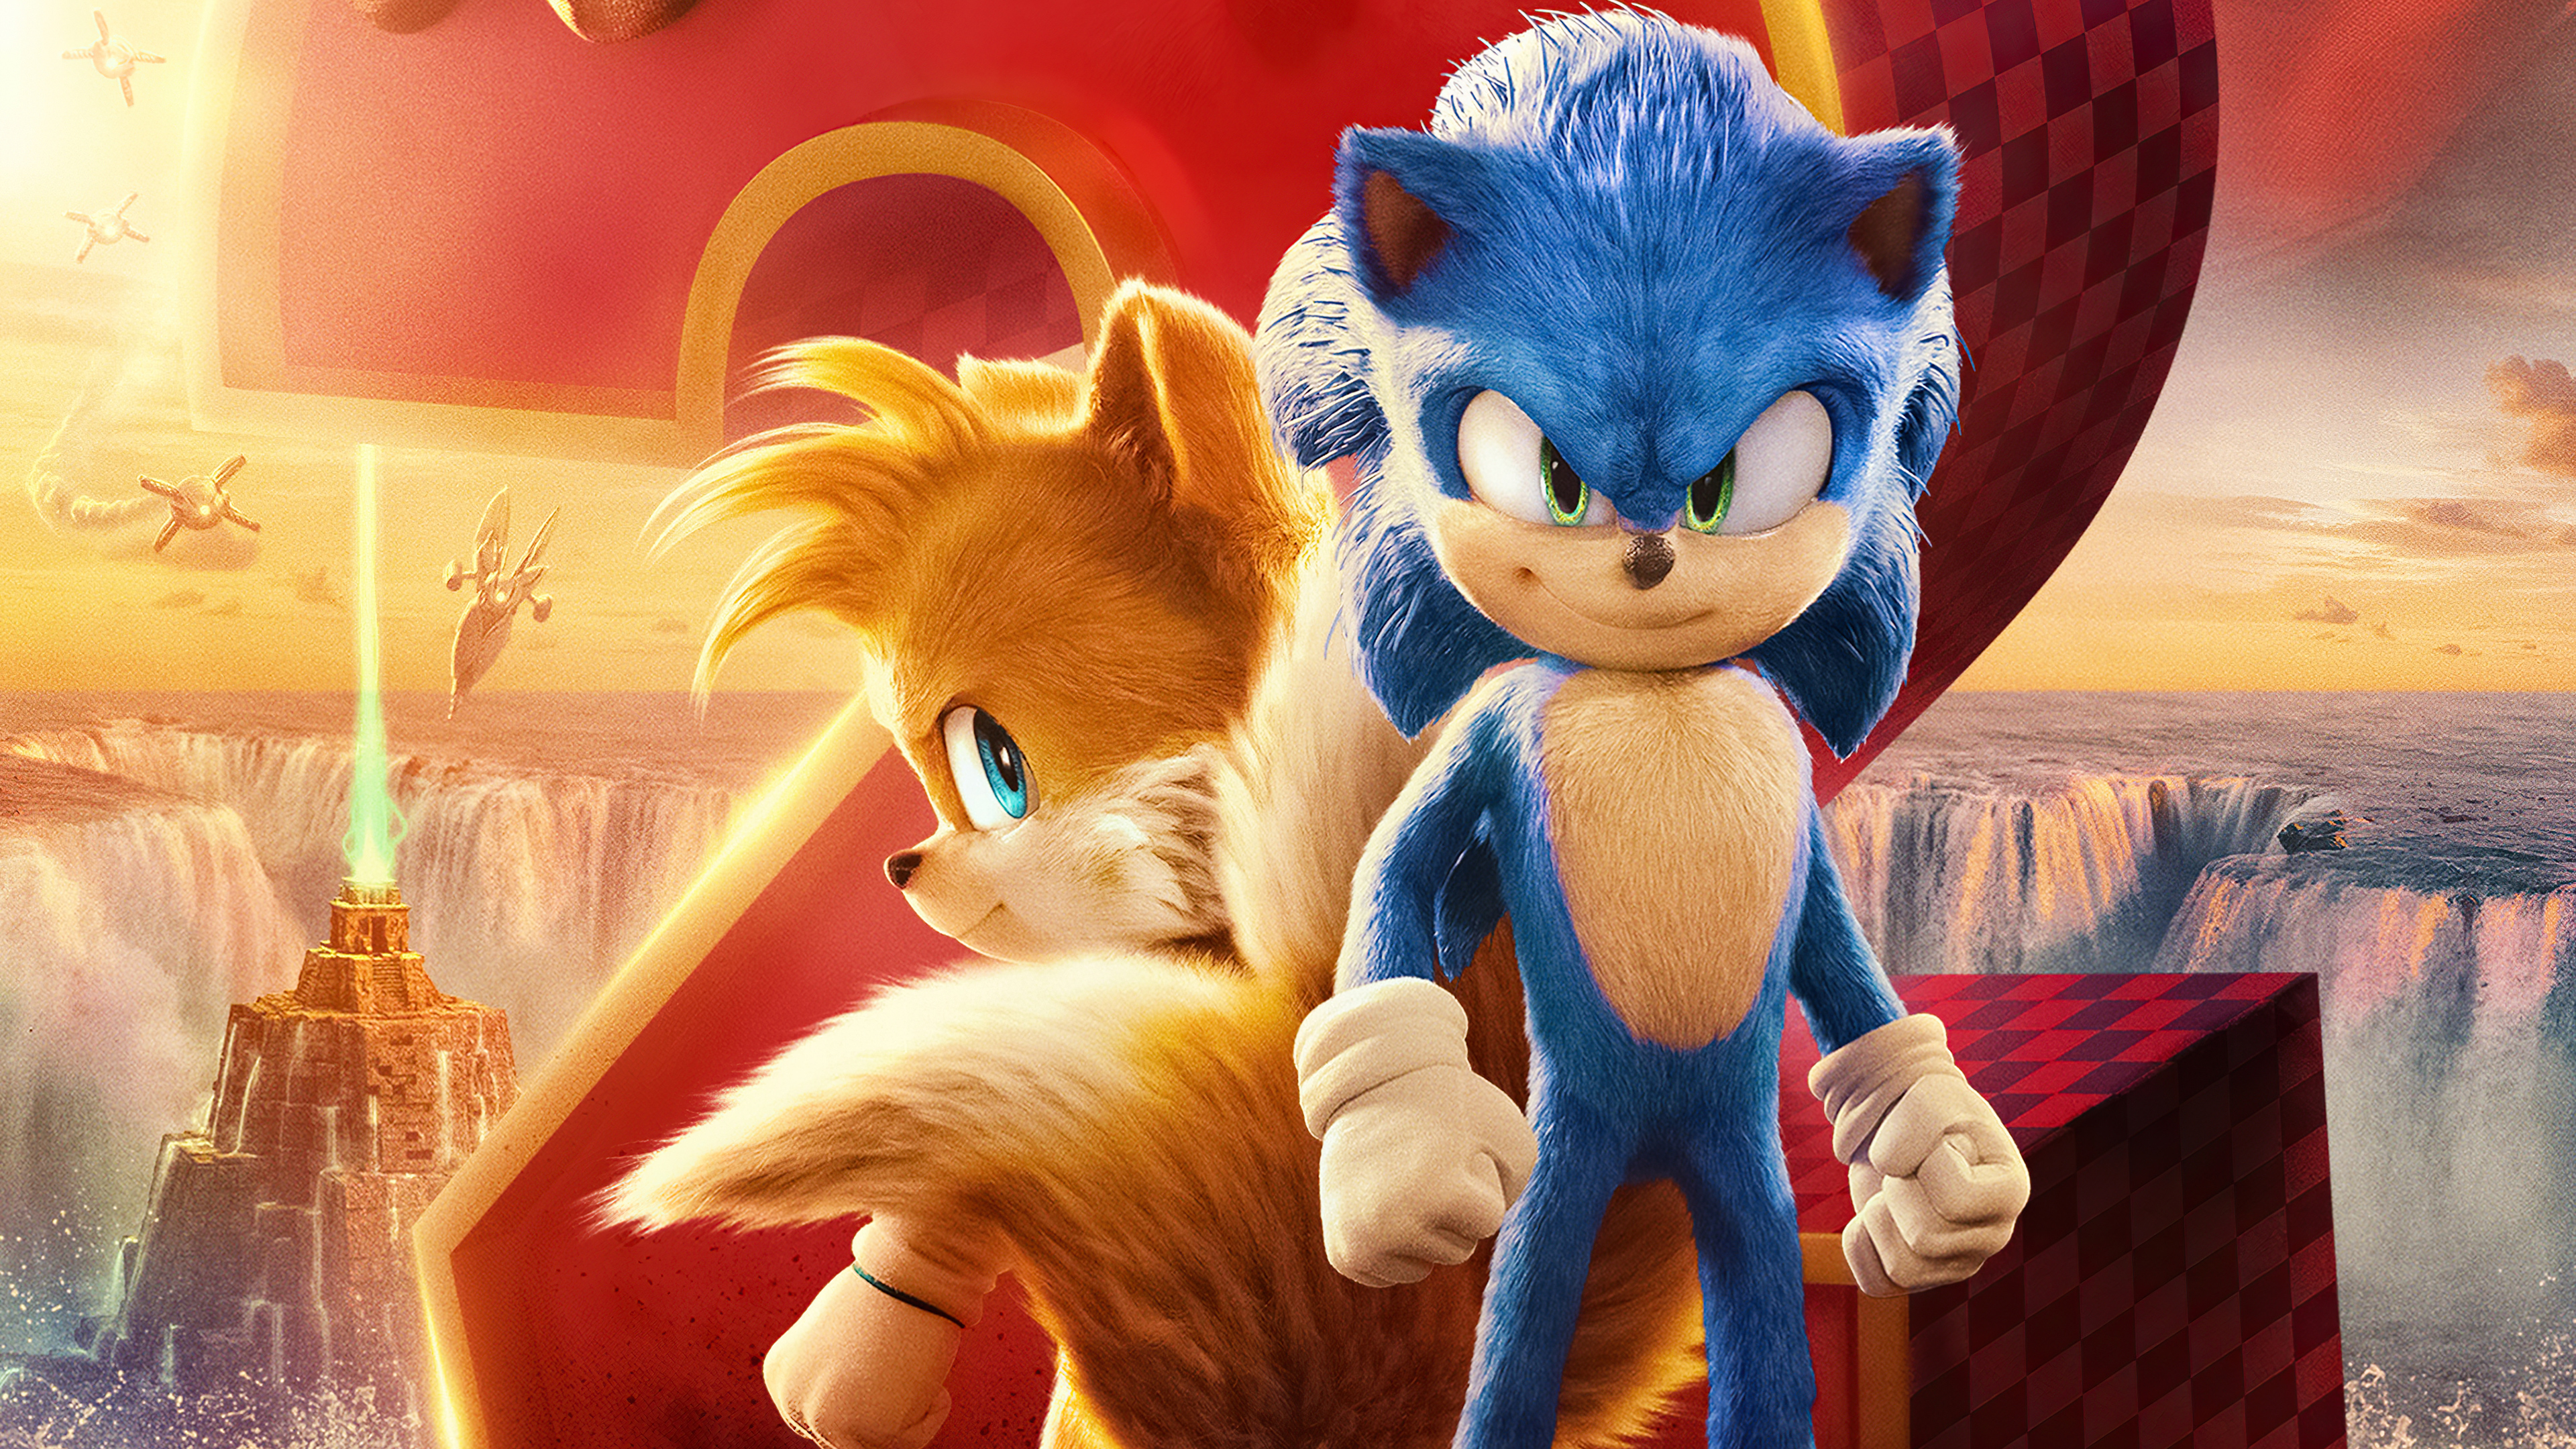 Sonic The Hedgehog 2 Movie Poster, HD Movies, 4k Wallpapers, Images,  Backgrounds, Photos and Pictures